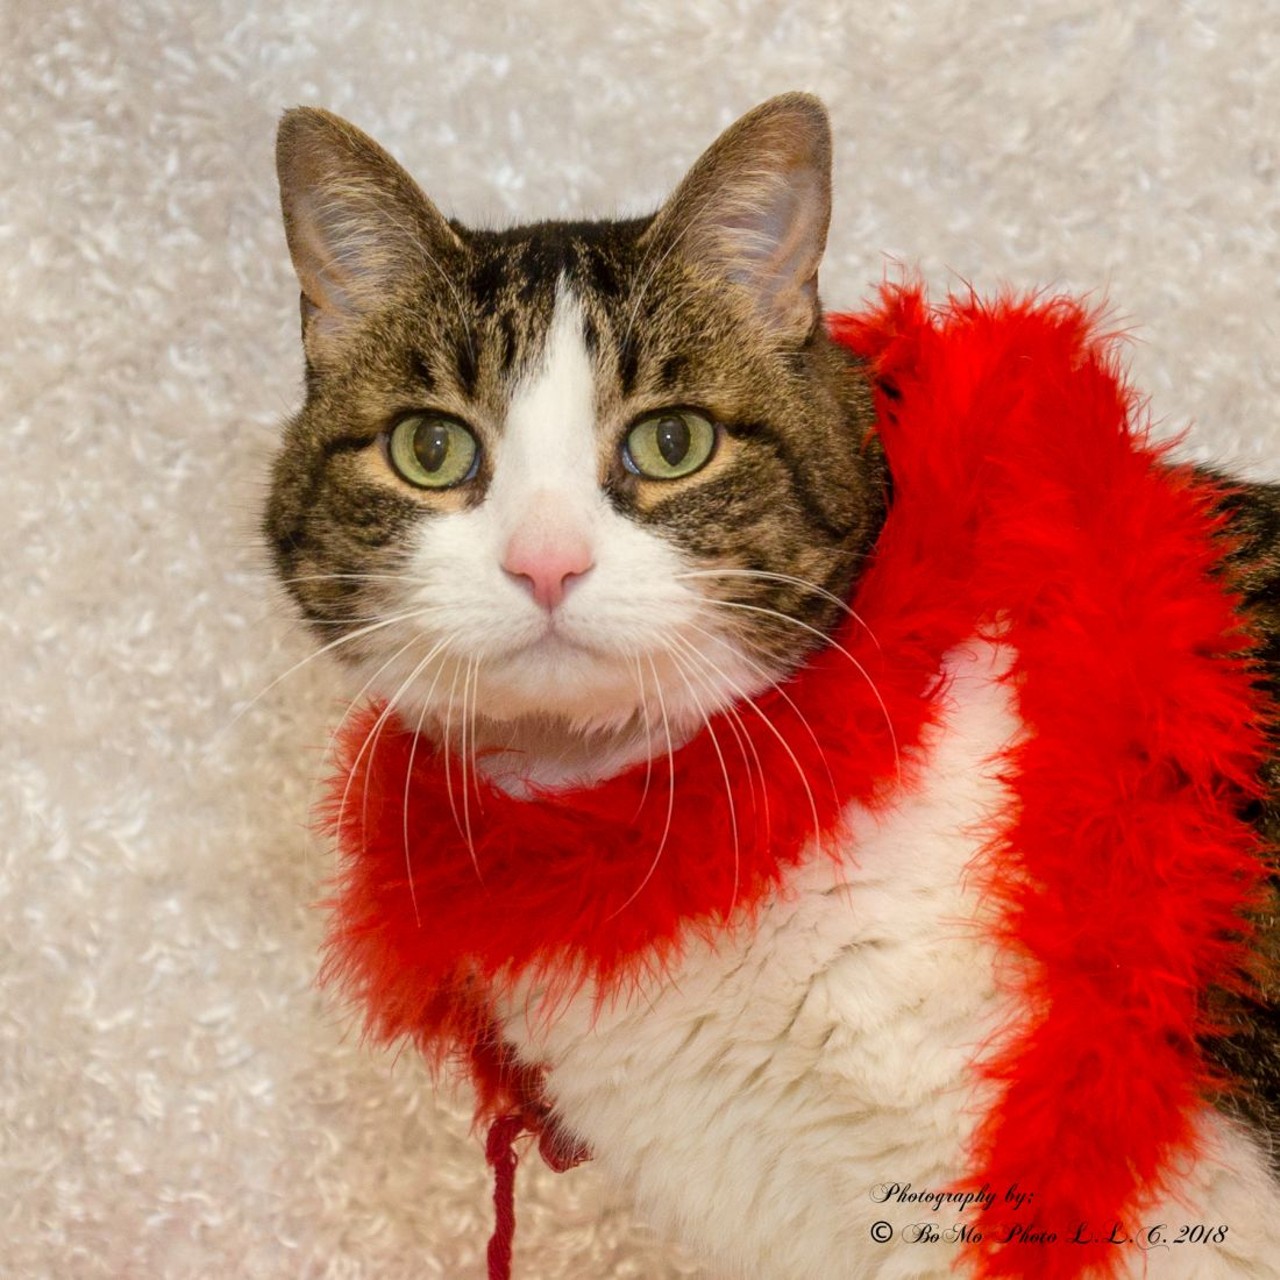 NAME: Neka
GENDER: Female
BREED: Domestic Short Hair
AGE: 12 years, 8 months
WEIGHT: 15 pounds
SPECIAL CONSIDERATIONS: Prefers a home without children
REASON I CAME TO MHS: Owner fell ill
LOCATION: Rochester Hills Center for Animal Care
ID NUMBER: 850008